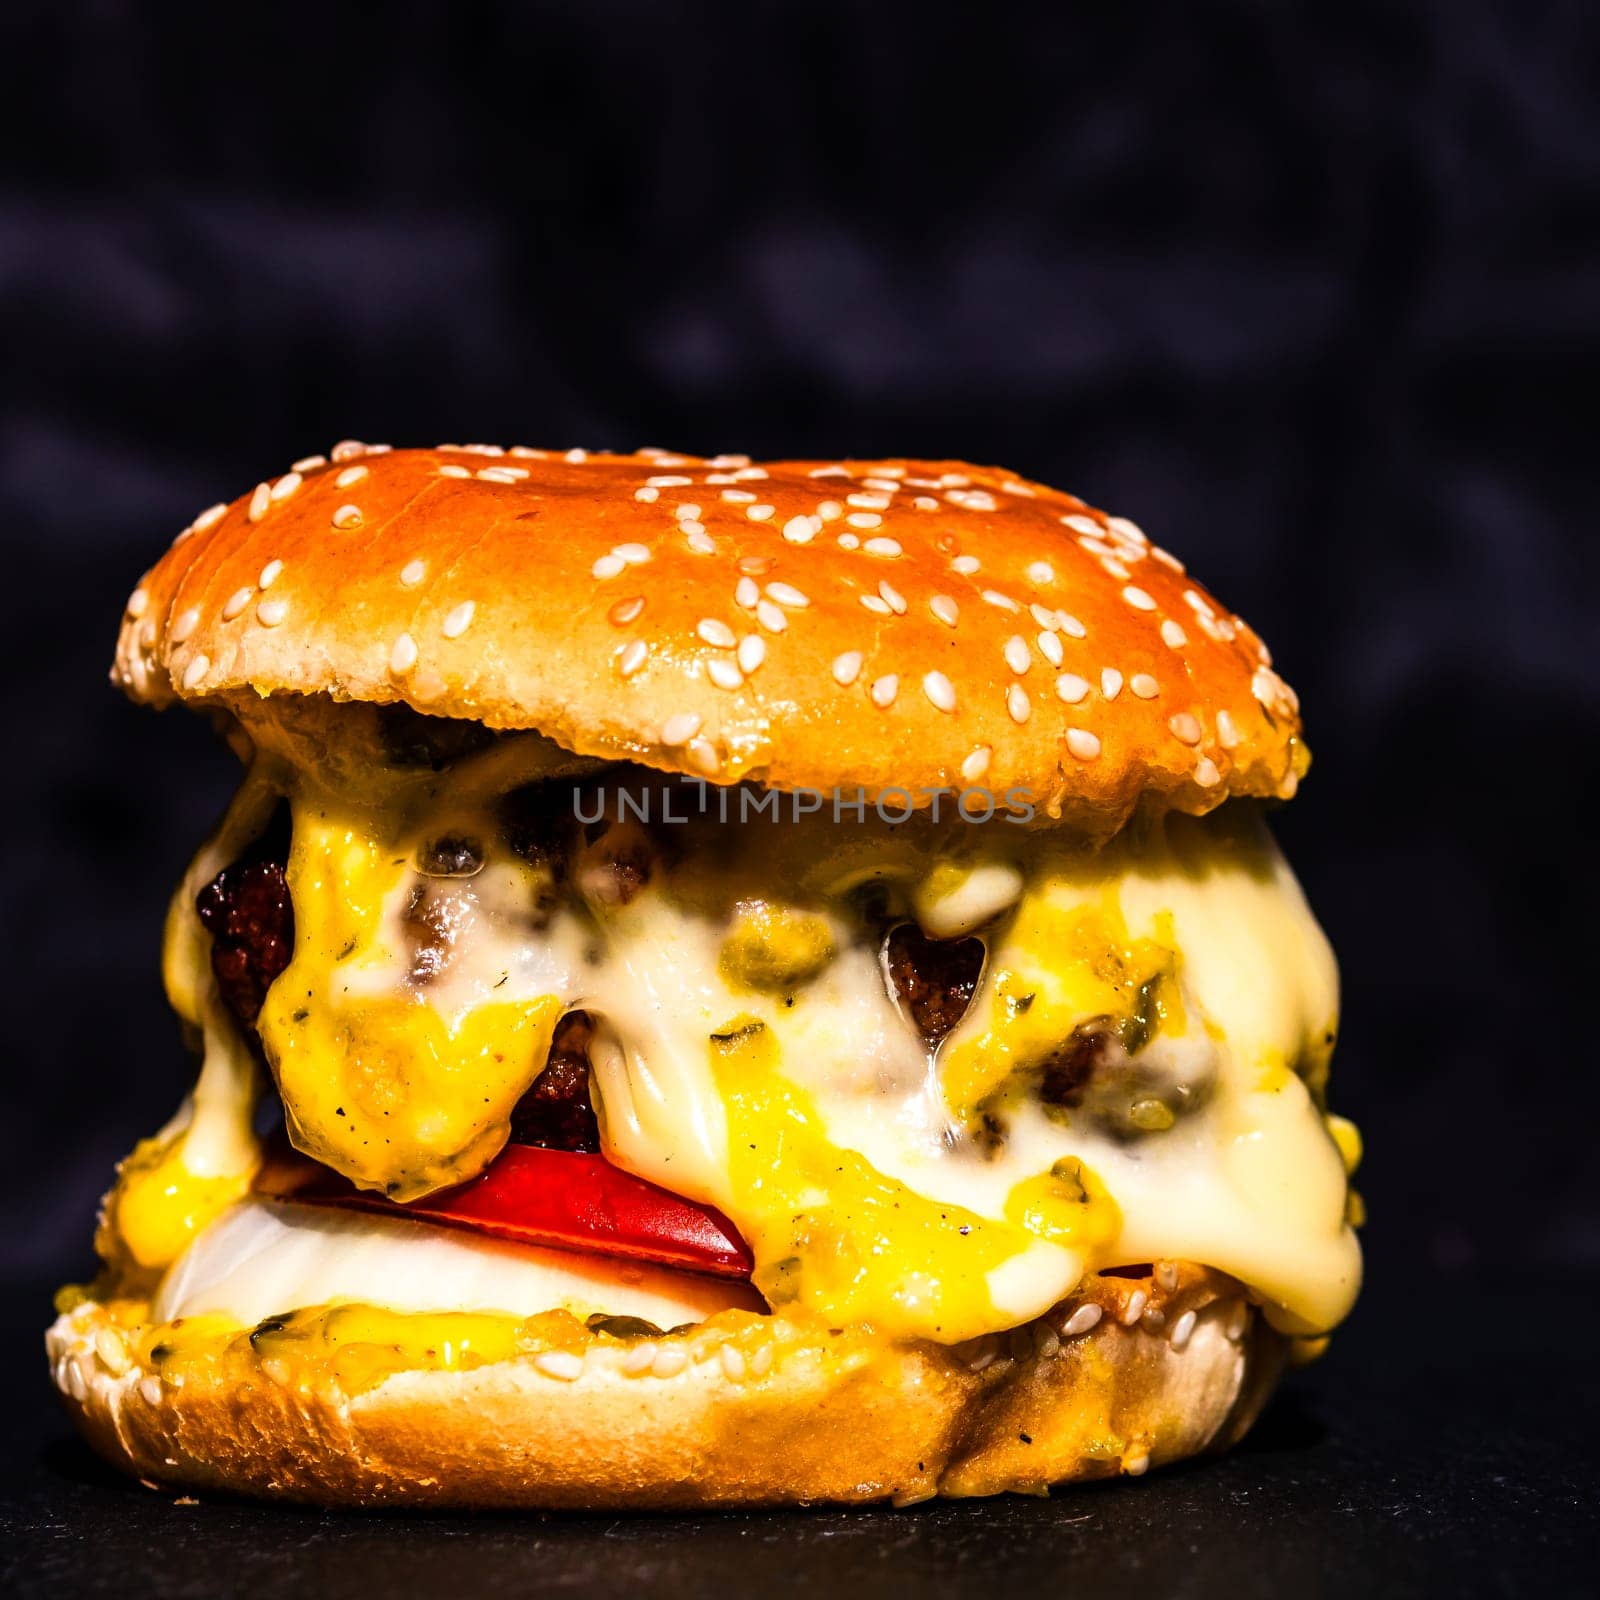 Tasty home made cheeseburger. Cheese burger with pickles, tomatoes, onion, melting cheese